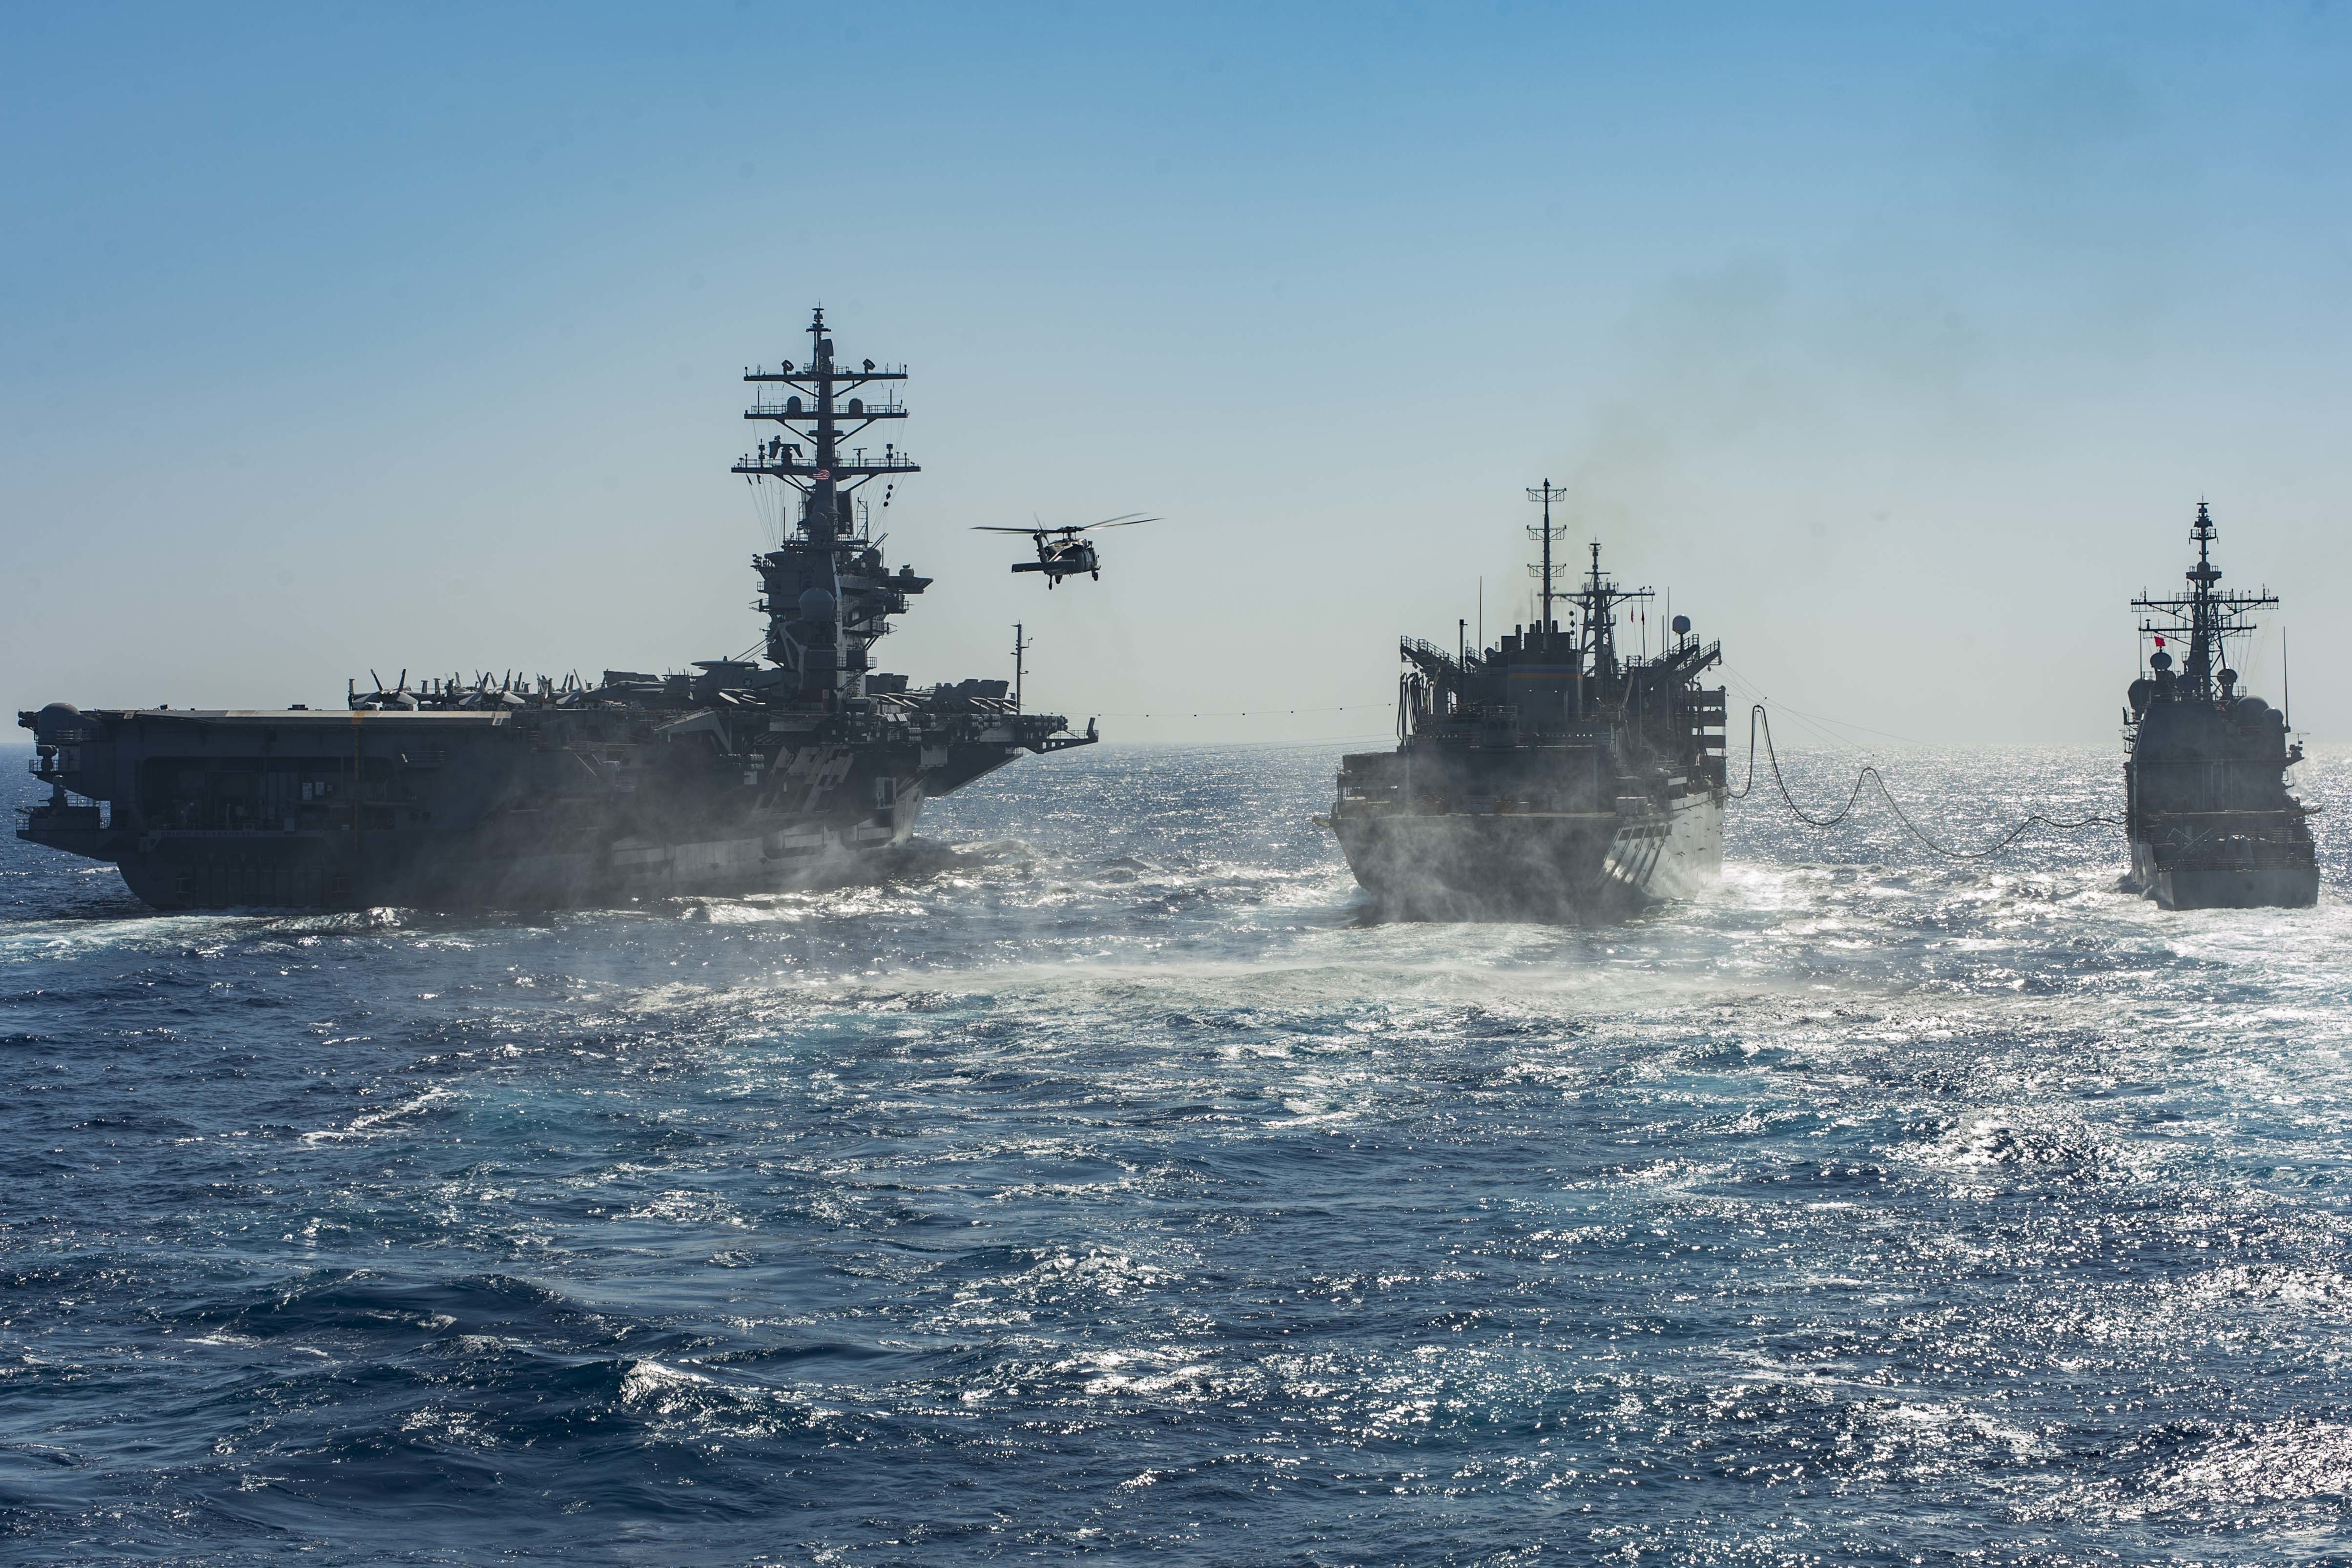 160614-N-EO381-054 MEDITERRANEAN SEA (June 14, 2016) An MH-60R Seah Hawk helicopter assigned to the Dusty Dogs of Helicopter Sea Combat Squadron (HSC) 7 flies from the aircraft carrier USS Dwight D. Eisenhower (CVN 69), left, and the guided-missile cruiser USS San Jacinto (CG 56) during a replenishment-at-sea with the fast combat support ship USNS Arctic (T-AOE 8). The Eisenhower Carrier Strike Group is conducting naval operations in the U.S. 6th Fleet area of operations in support of U.S. national security interests in Europe. (U.S. Navy photo by Mass Communication Specialist 3rd Class Casey J. Hopkins/Released)